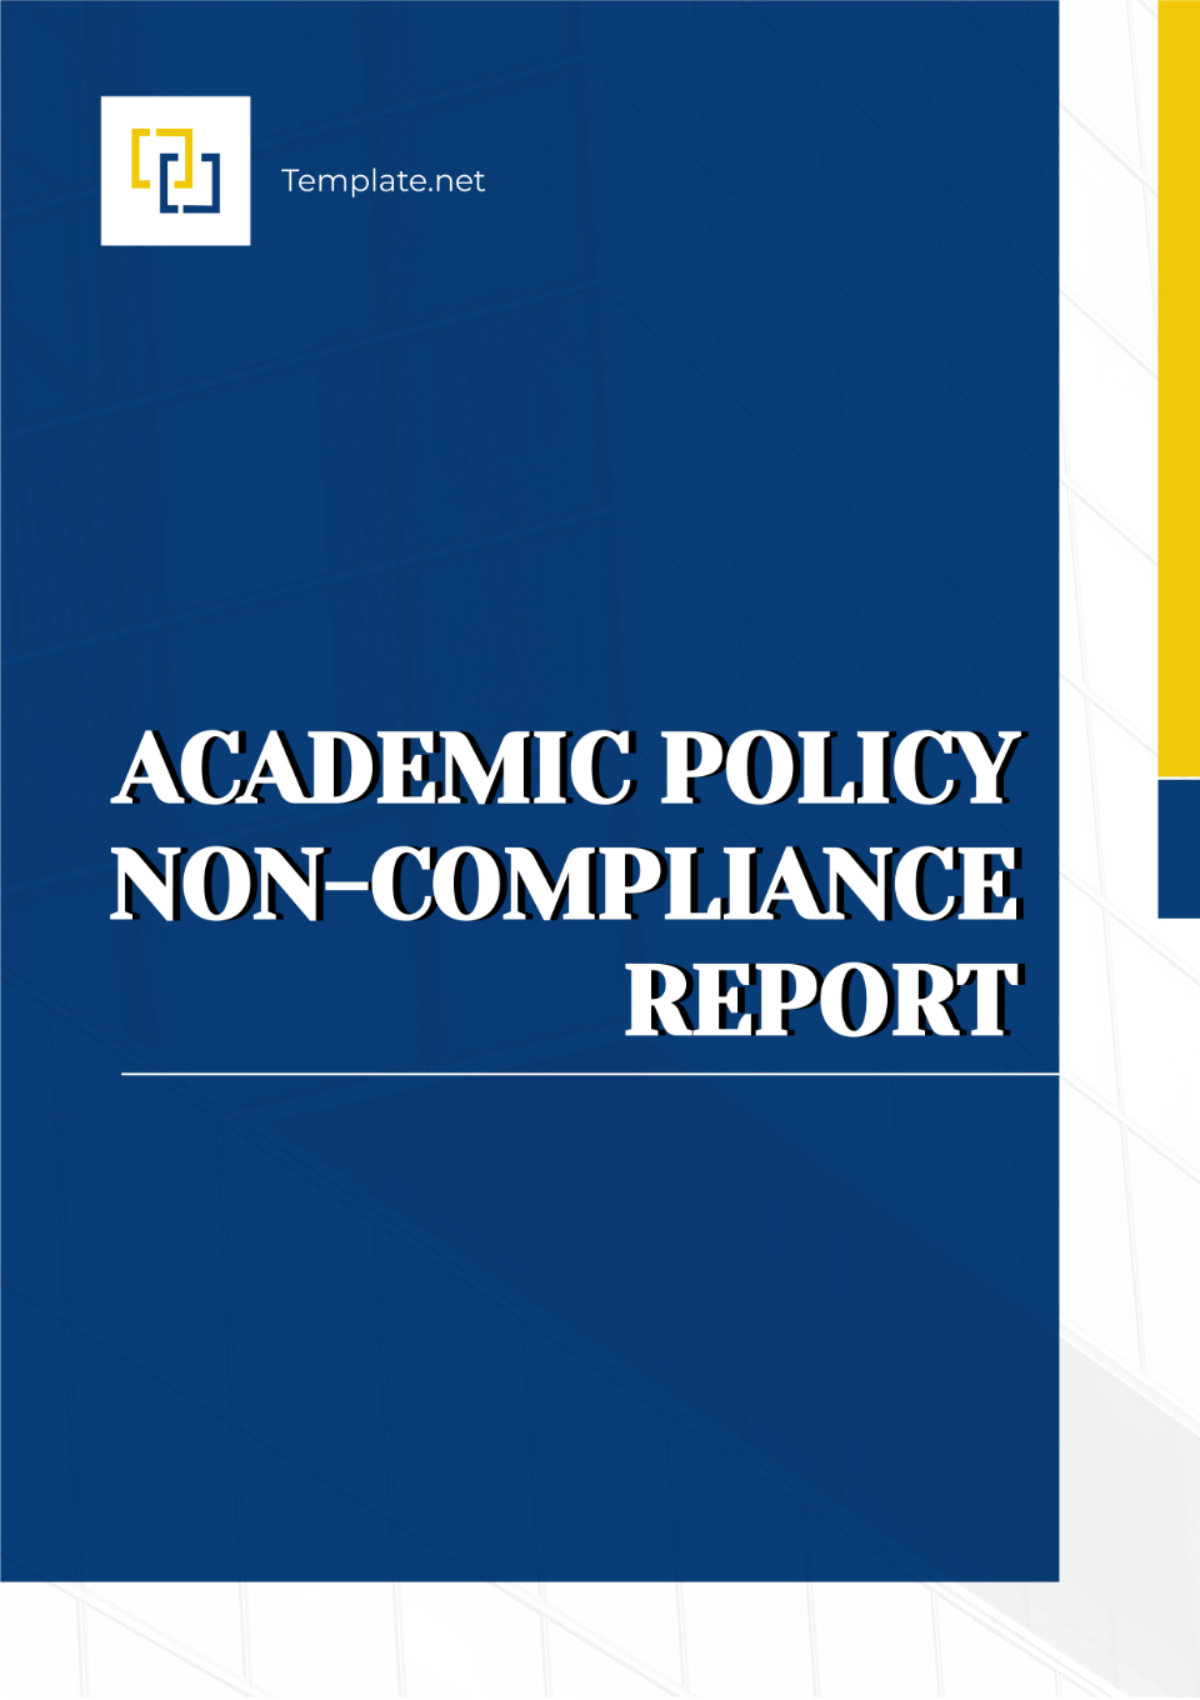 Free Academic Policy Non-Compliance Report Template